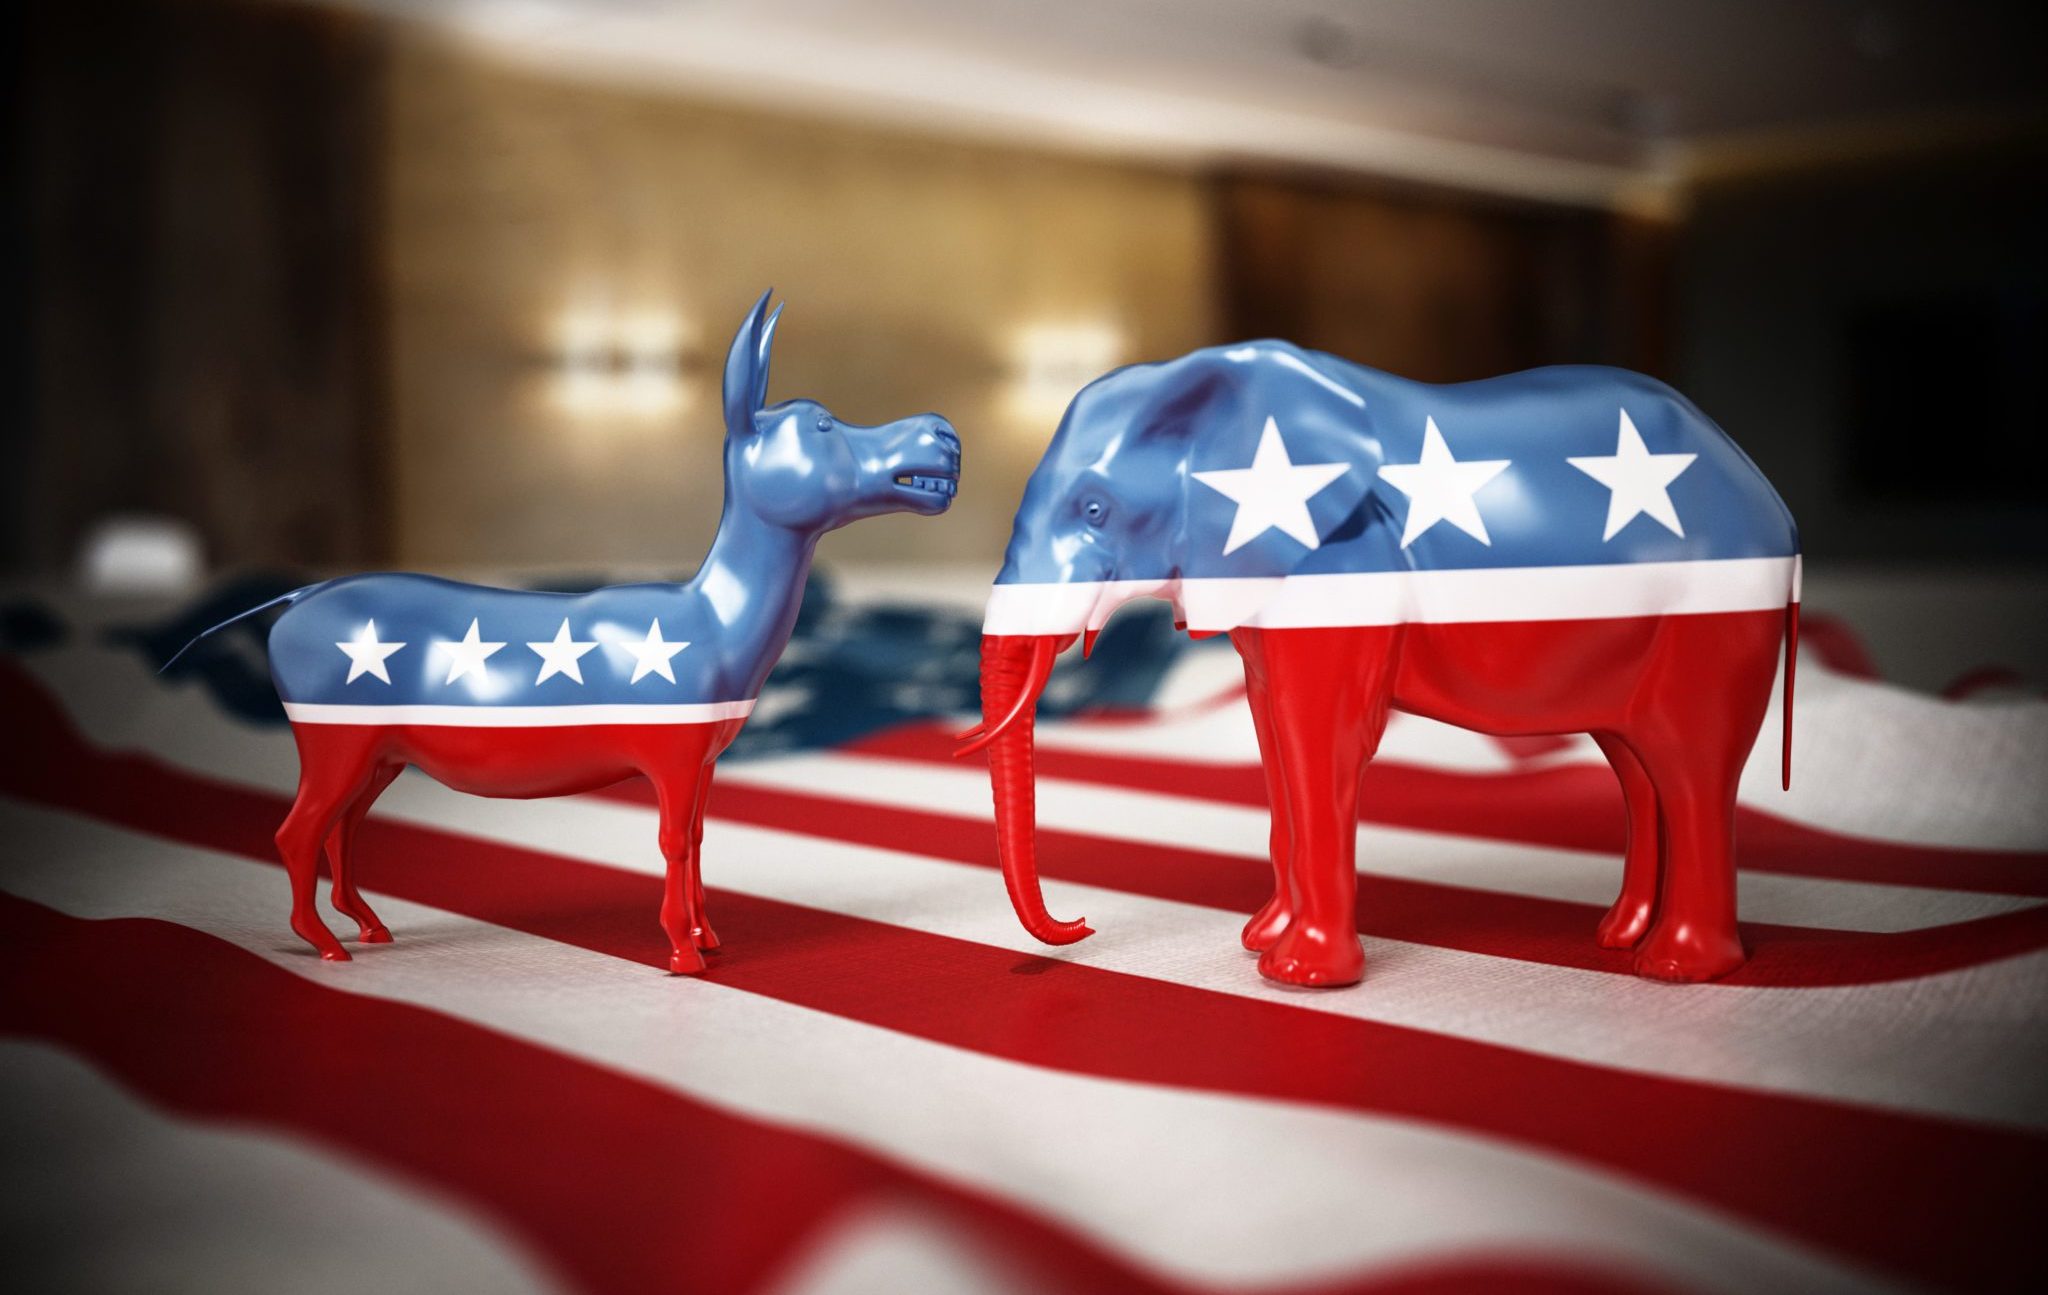 Republican,And,Democrat,Party,Political,Symbols,Elephant,And,Donkey,On